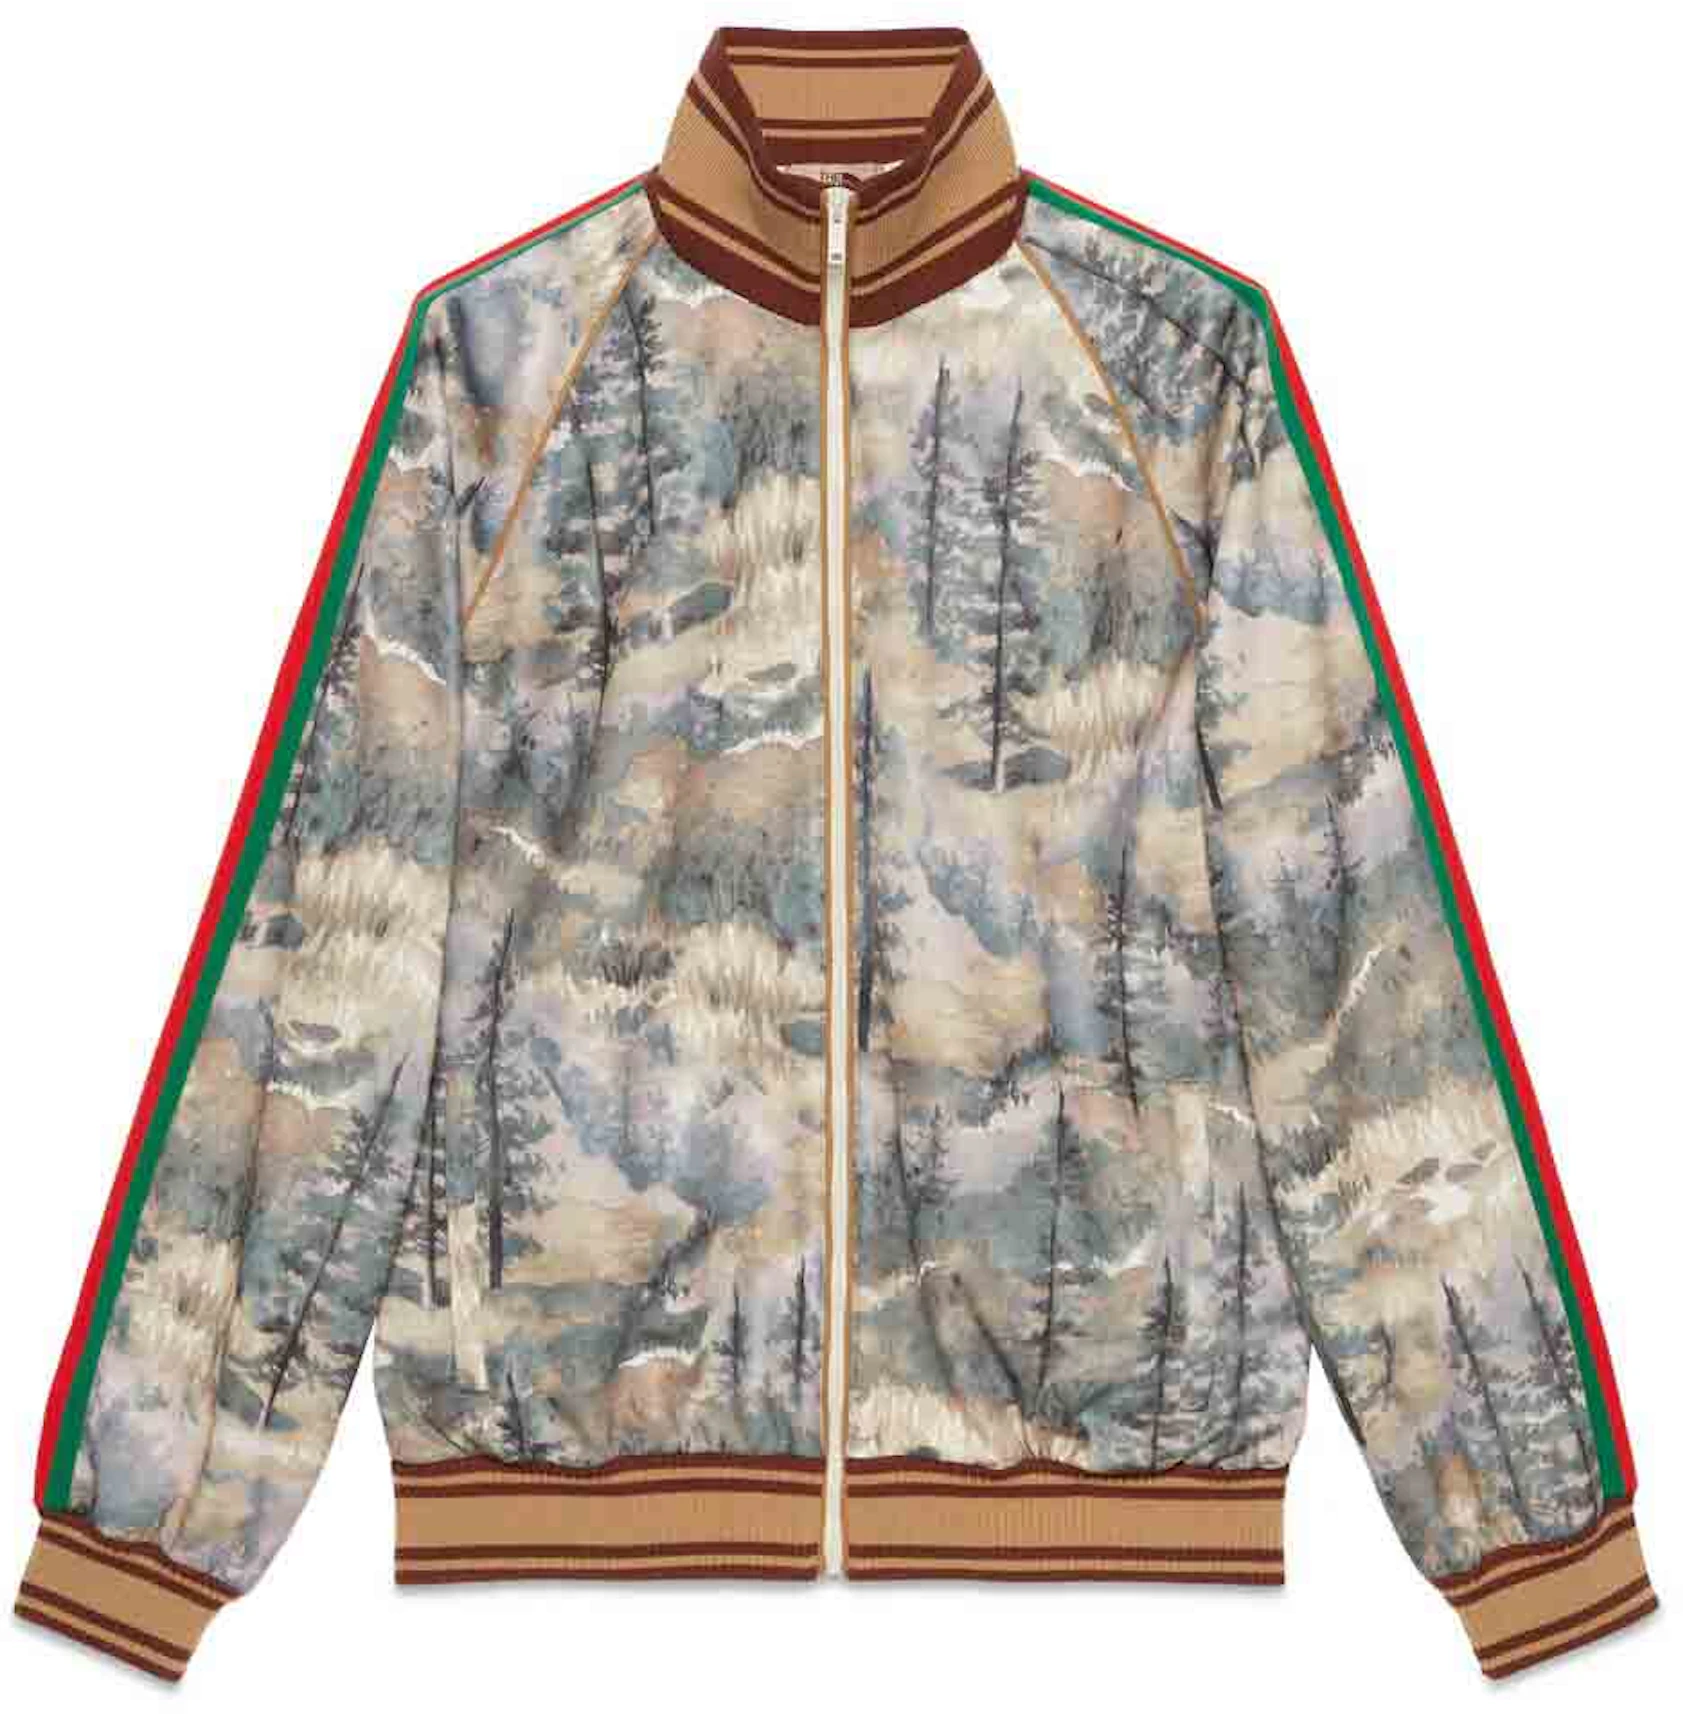 Gucci x The North Face Jacket Forest Print - FW21 - MX